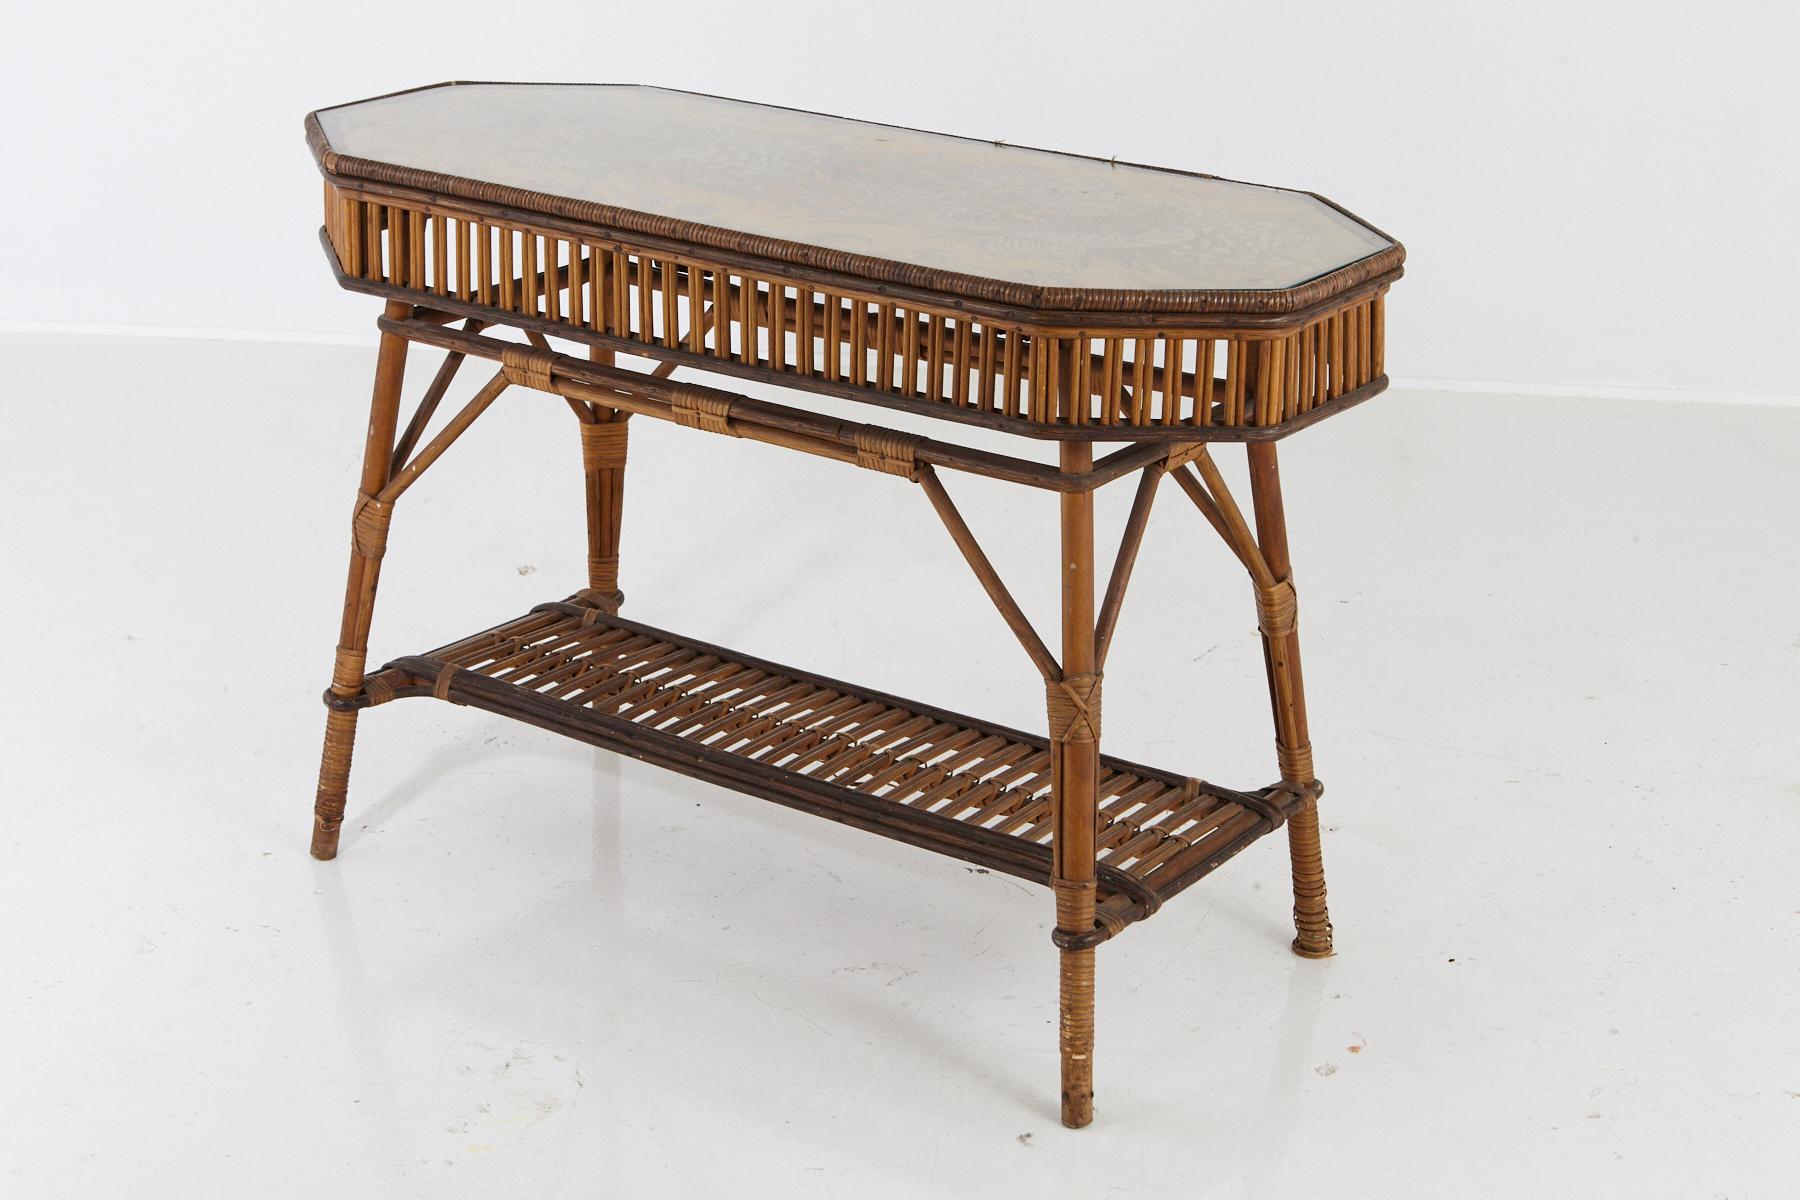 1930s French octagonal bamboo and wicker console table with glass top and a second tier.
The table is in good, solid and stable condition, the is a small piece of wicker missing on the apron
and the fabric under the glass is a bit frayed on the